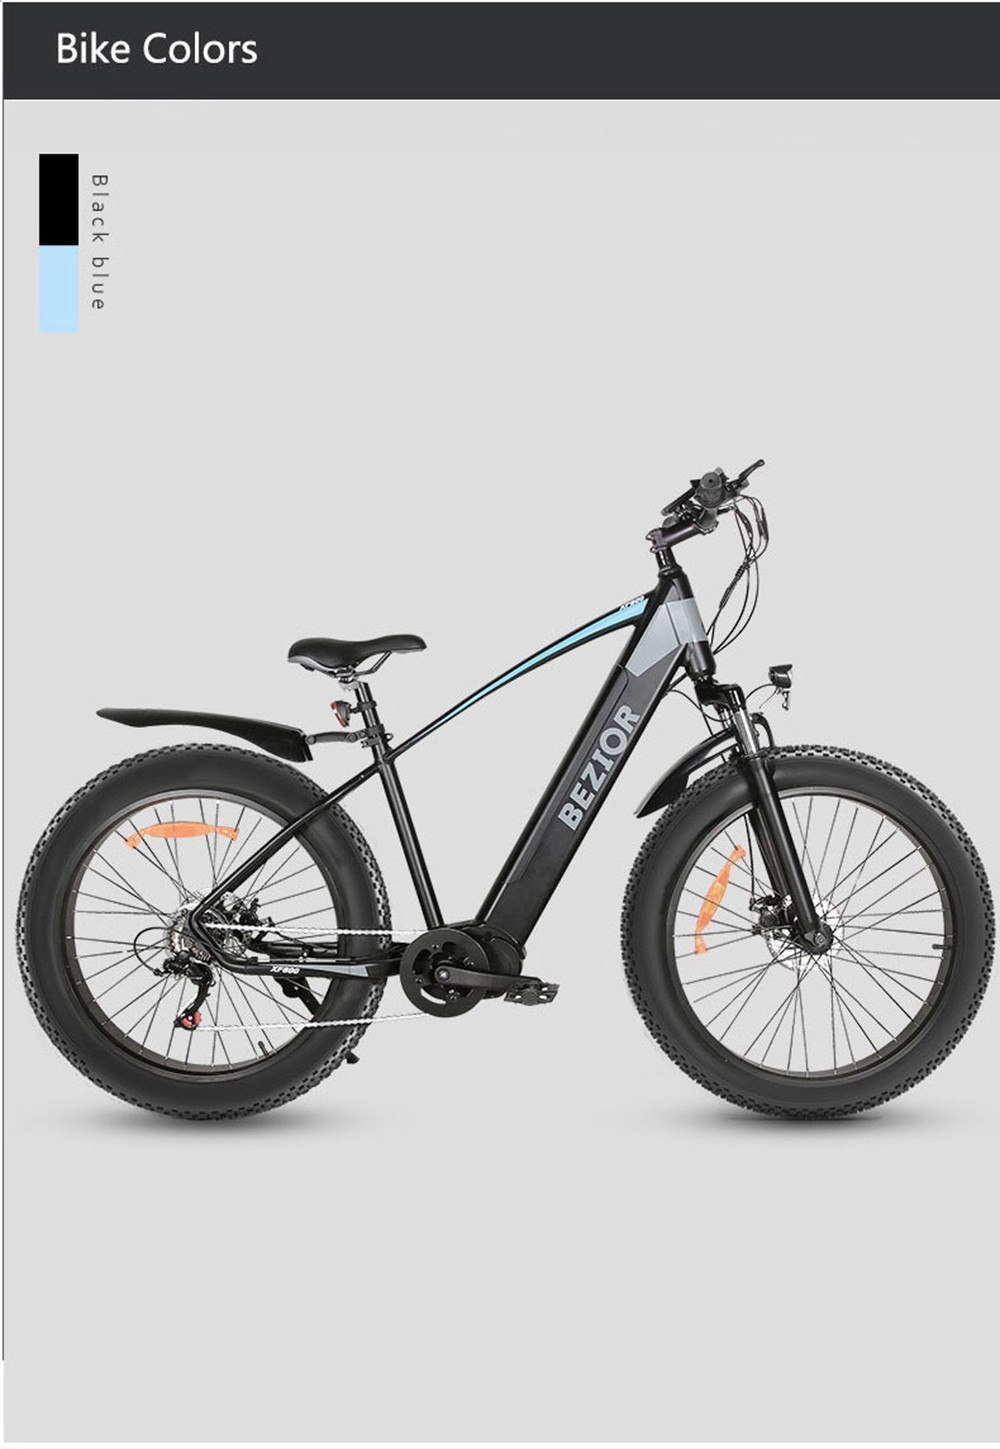 BEZIOR XF800 13Ah 48V 500W MID MOTOR Electric Bicycle 26inch 40km/h Max speed Max Load 90KG